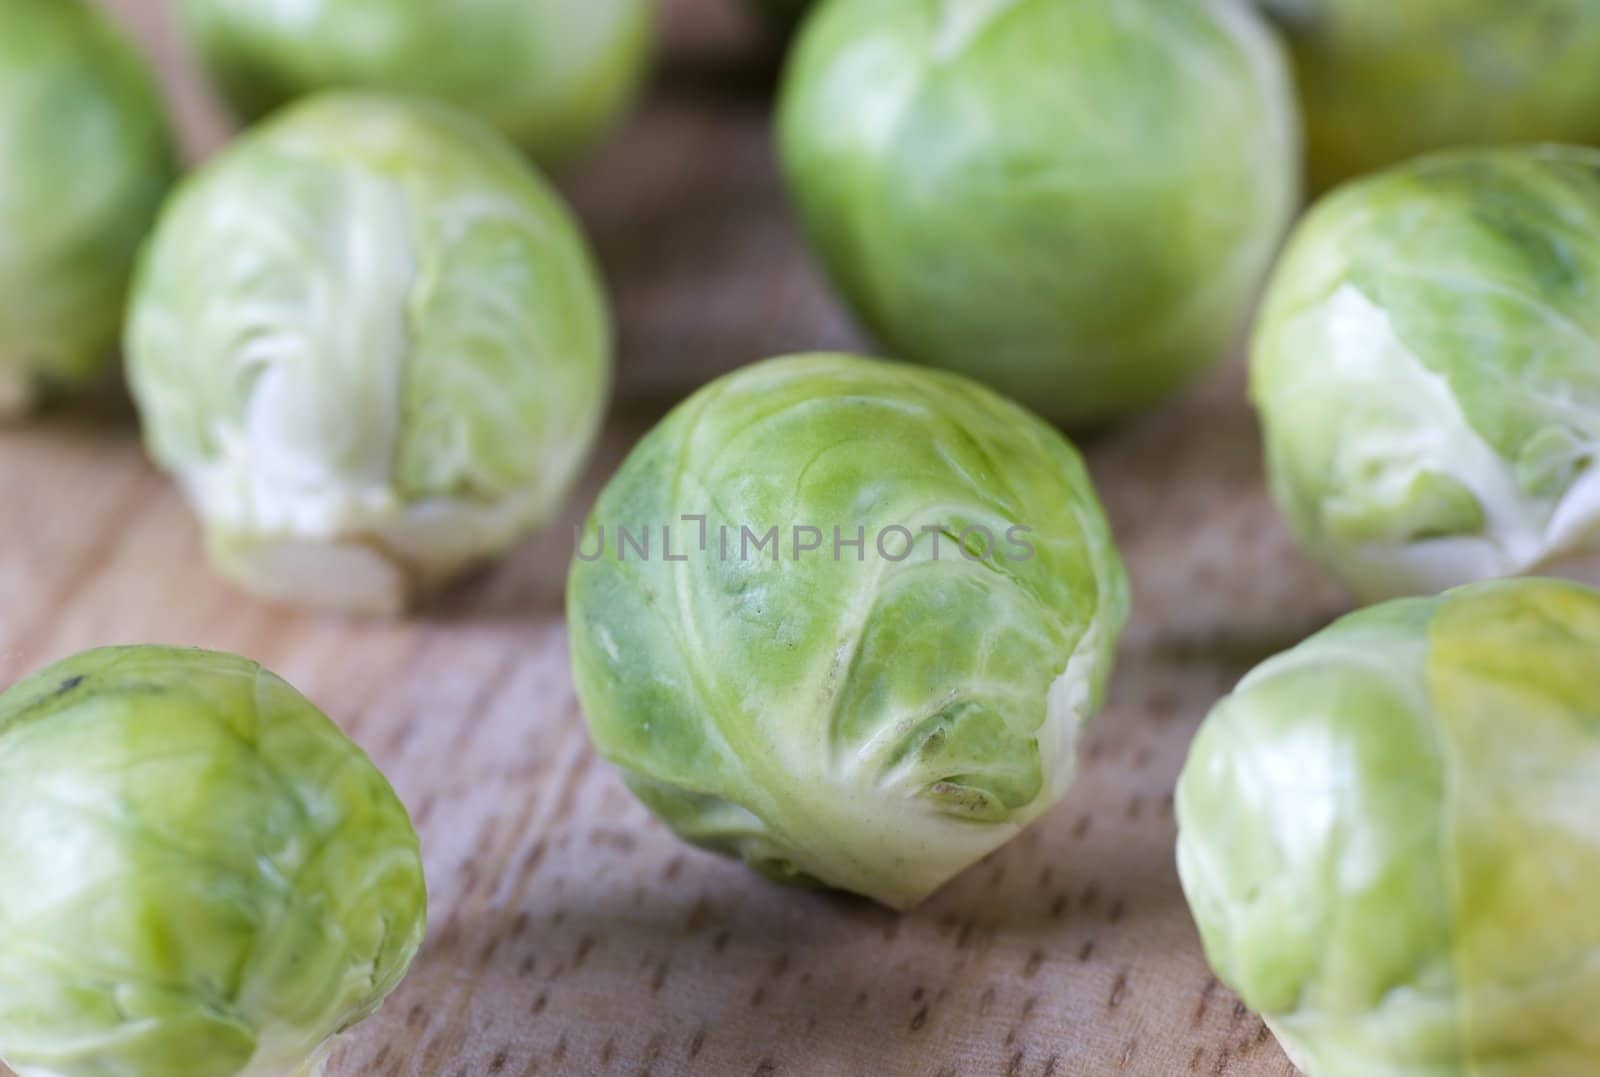 brussel sprout fresh and young vegetable in wooden salver

